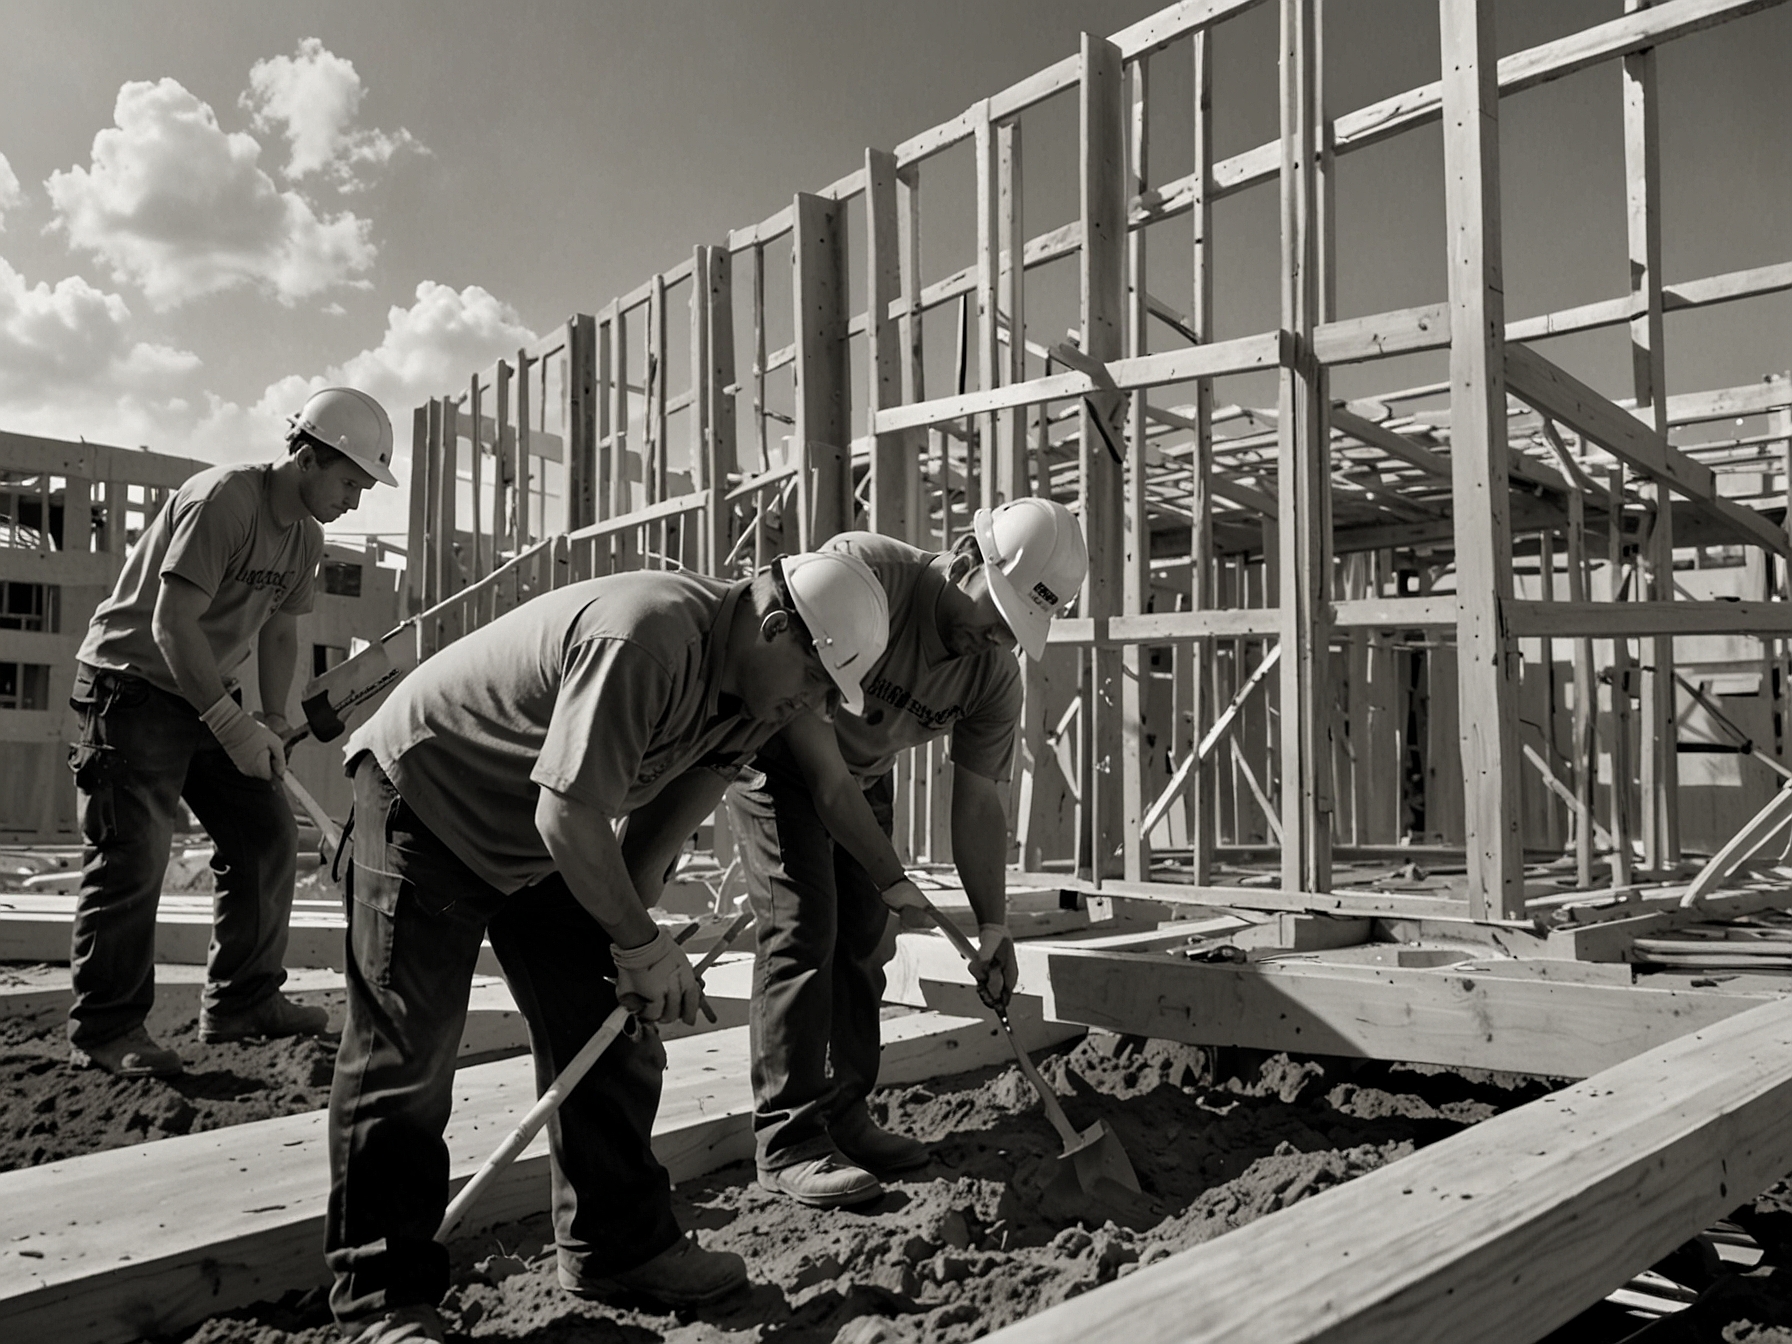 Construction workers building a housing project with an emphasized focus on fair wages, portraying Minnesota’s commitment to worker rights and economic stability.